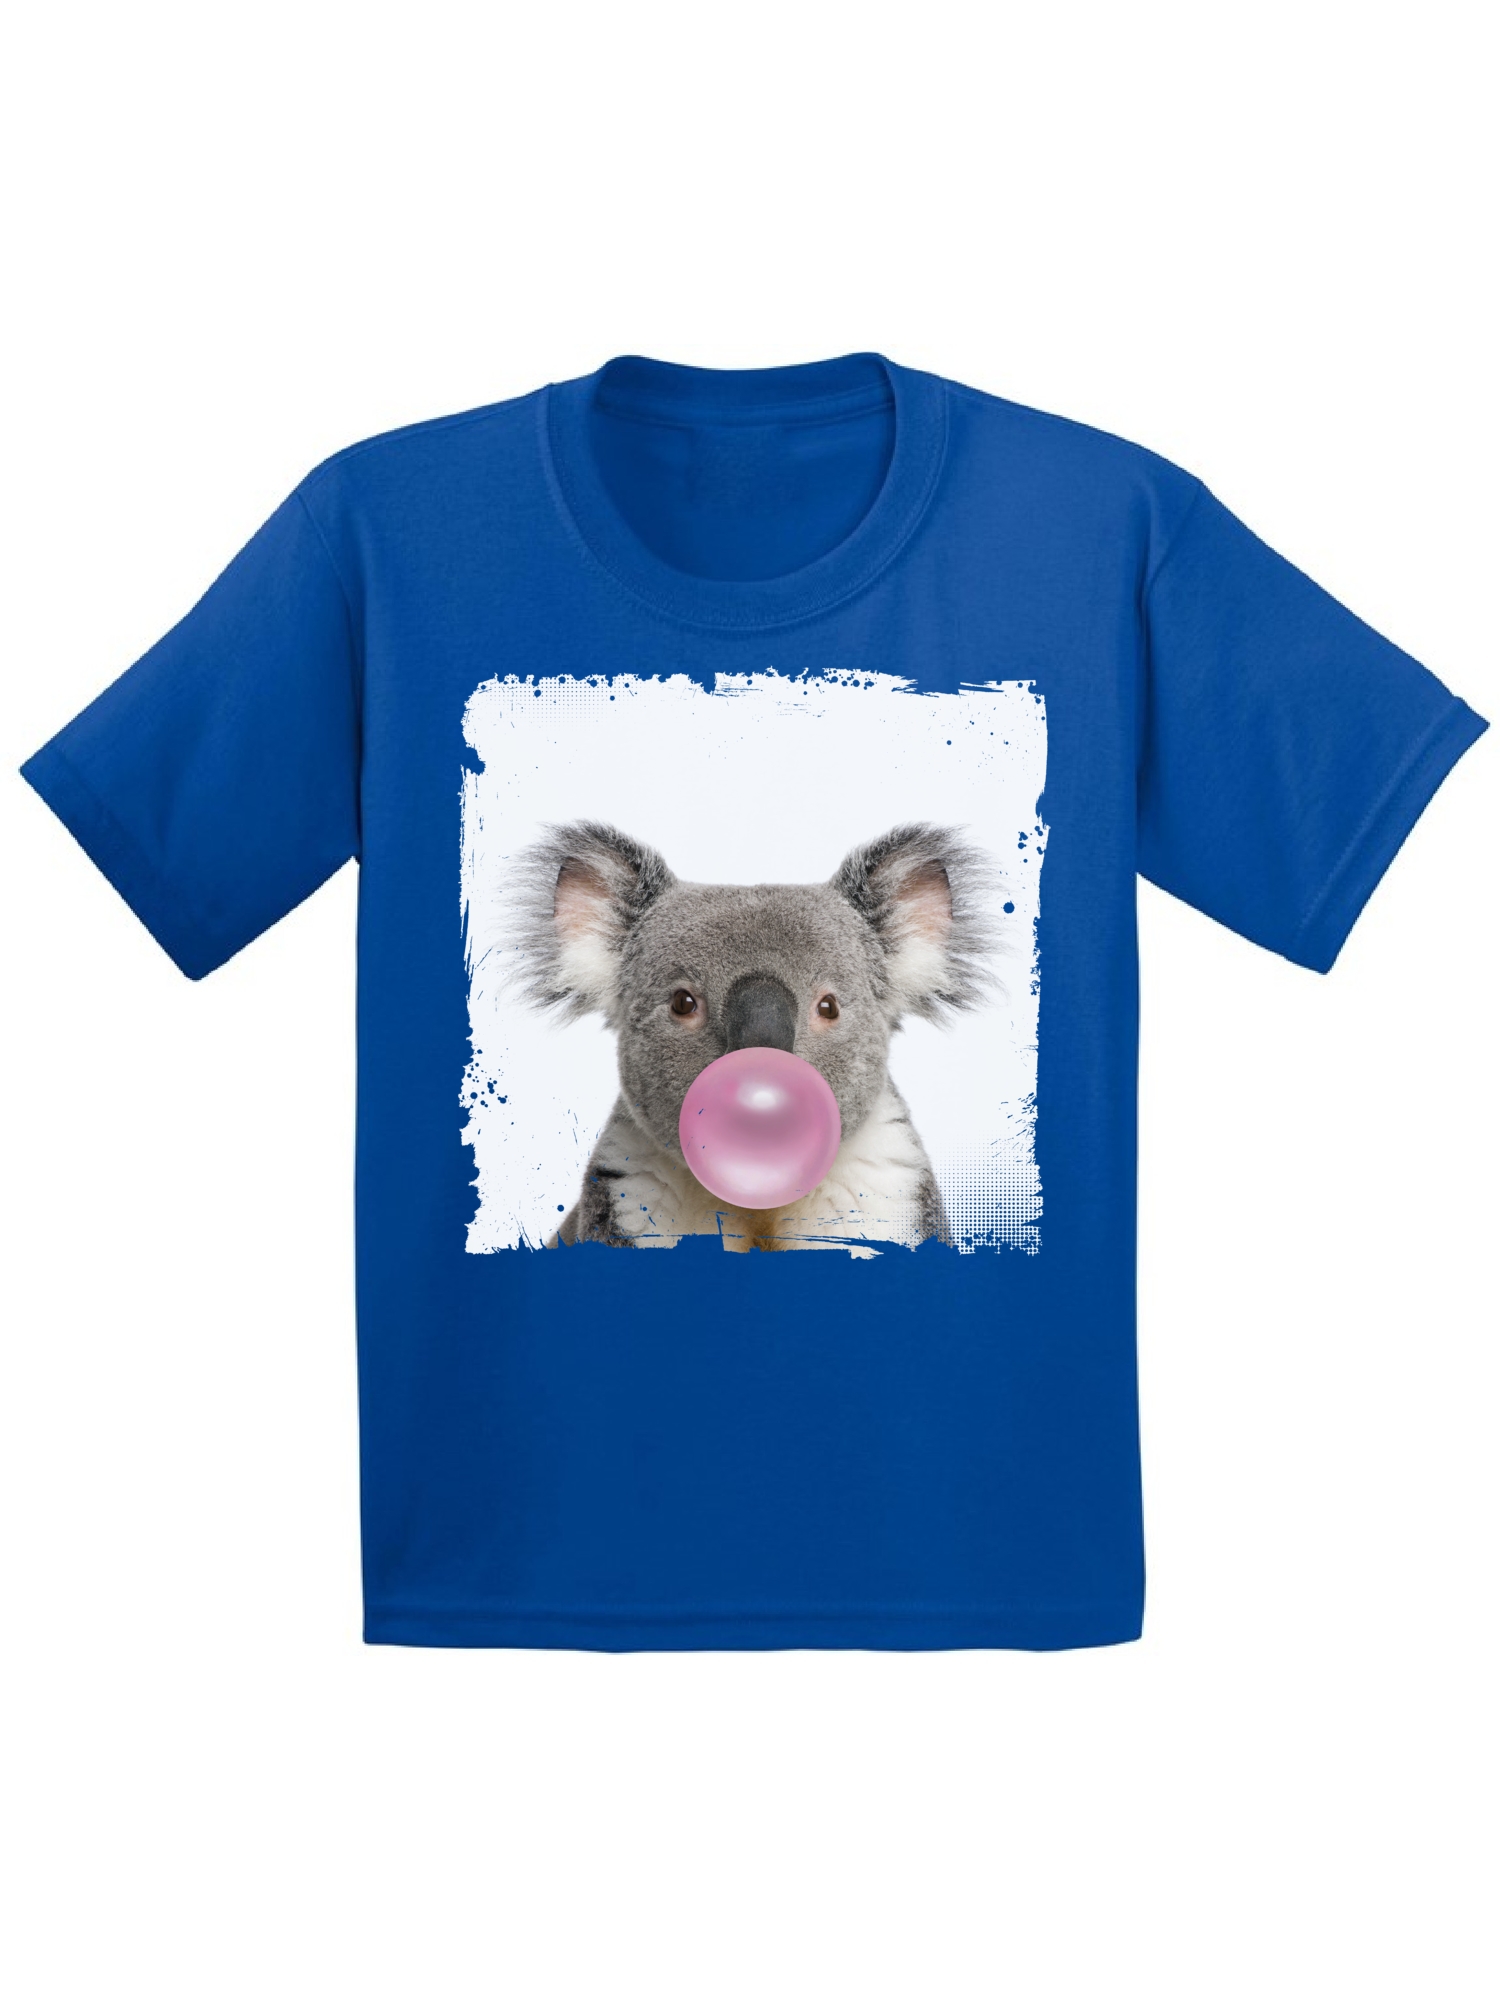 Awkward Styles Cute Animal Themed Collection Funny Koala with Gum Nifty Koala Clothing Koala Lovers Funny Gifts for Kids Childrens Outfit Koala Tshirt Koala Toddler Shirt Toddler T Shirt for Kids - image 1 of 4